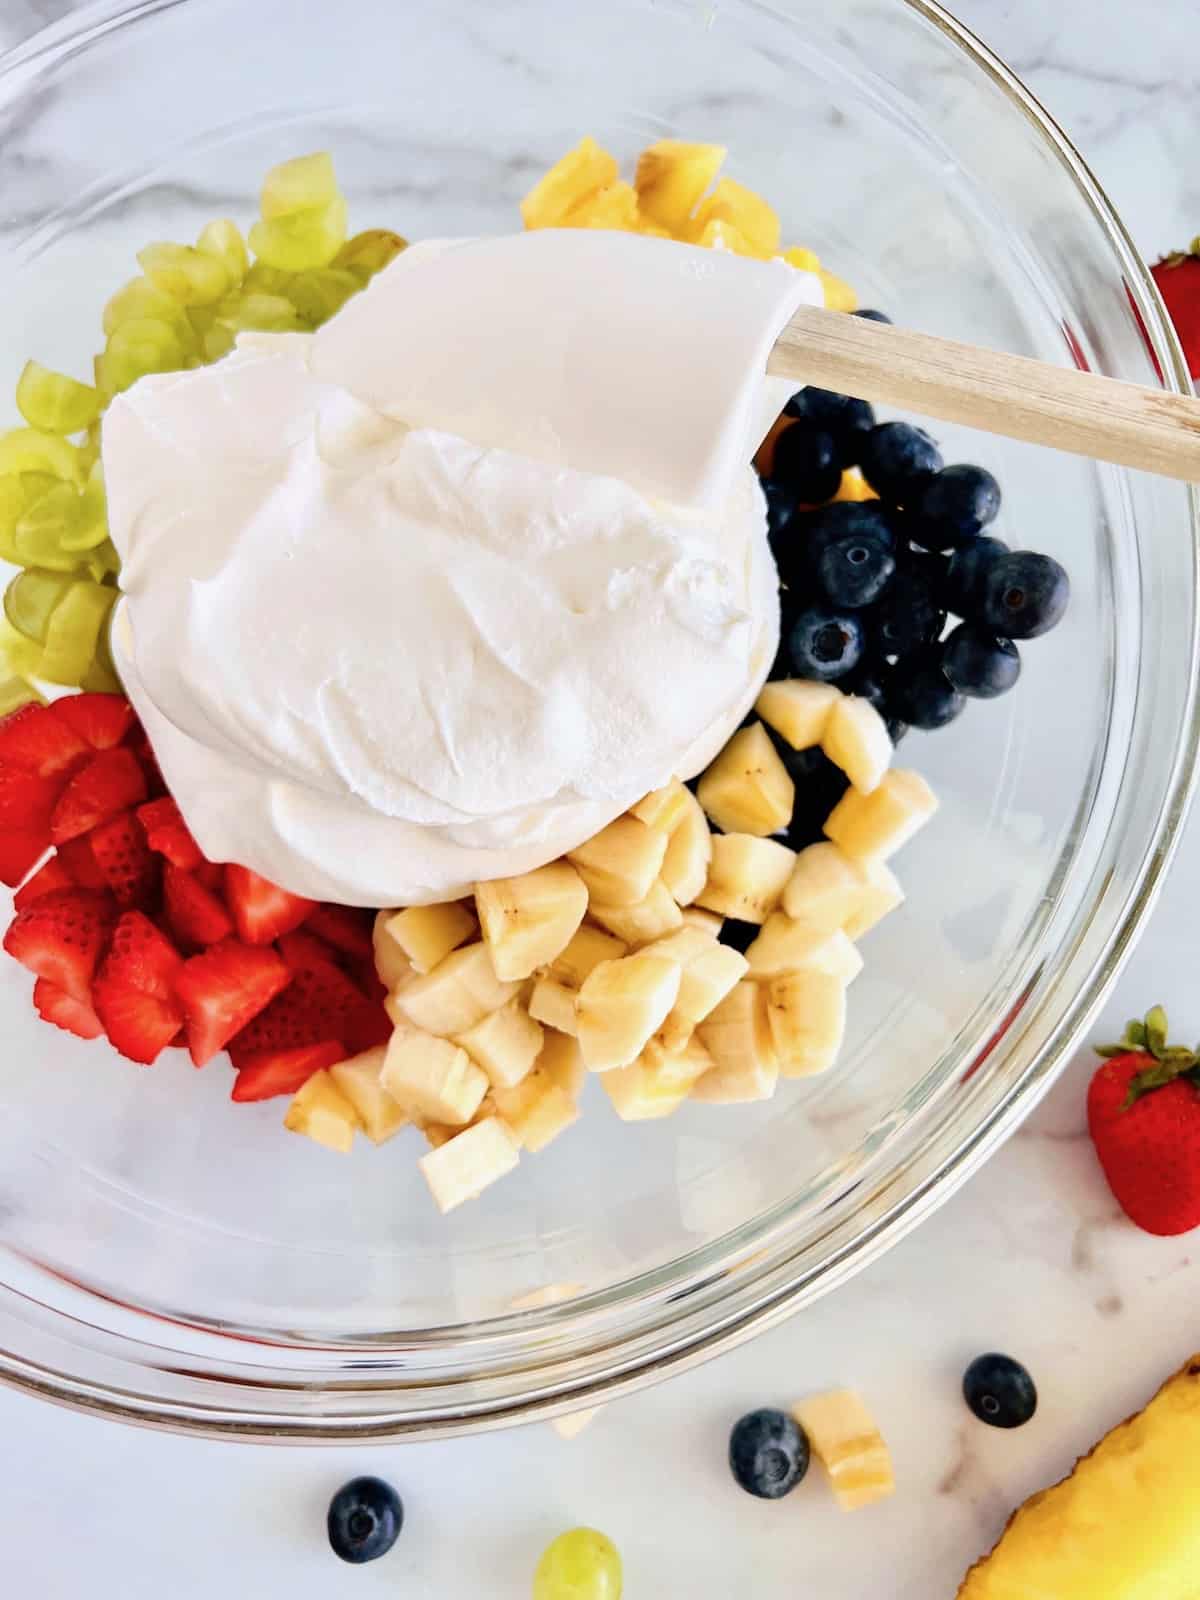 Scooping whipped topping onto cut fresh fruit.